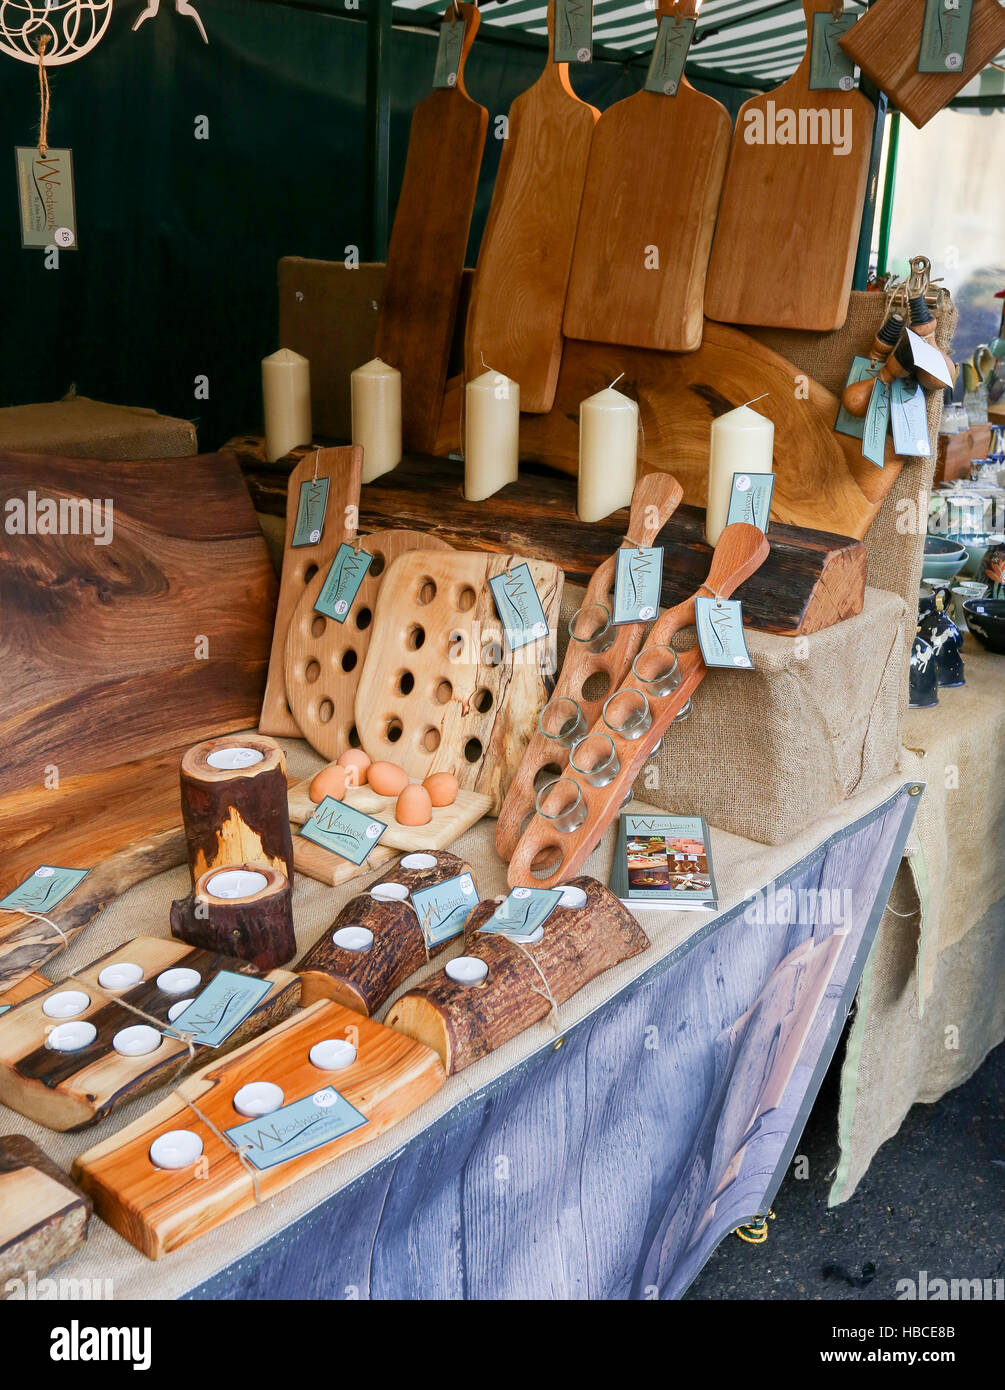 Broad Street, Oxford, United Kingdom, December 04, 2016: Arts and Crafts Market with open stalls on Broad Street stall with wood chopping boards, Oxford. Stock Photo